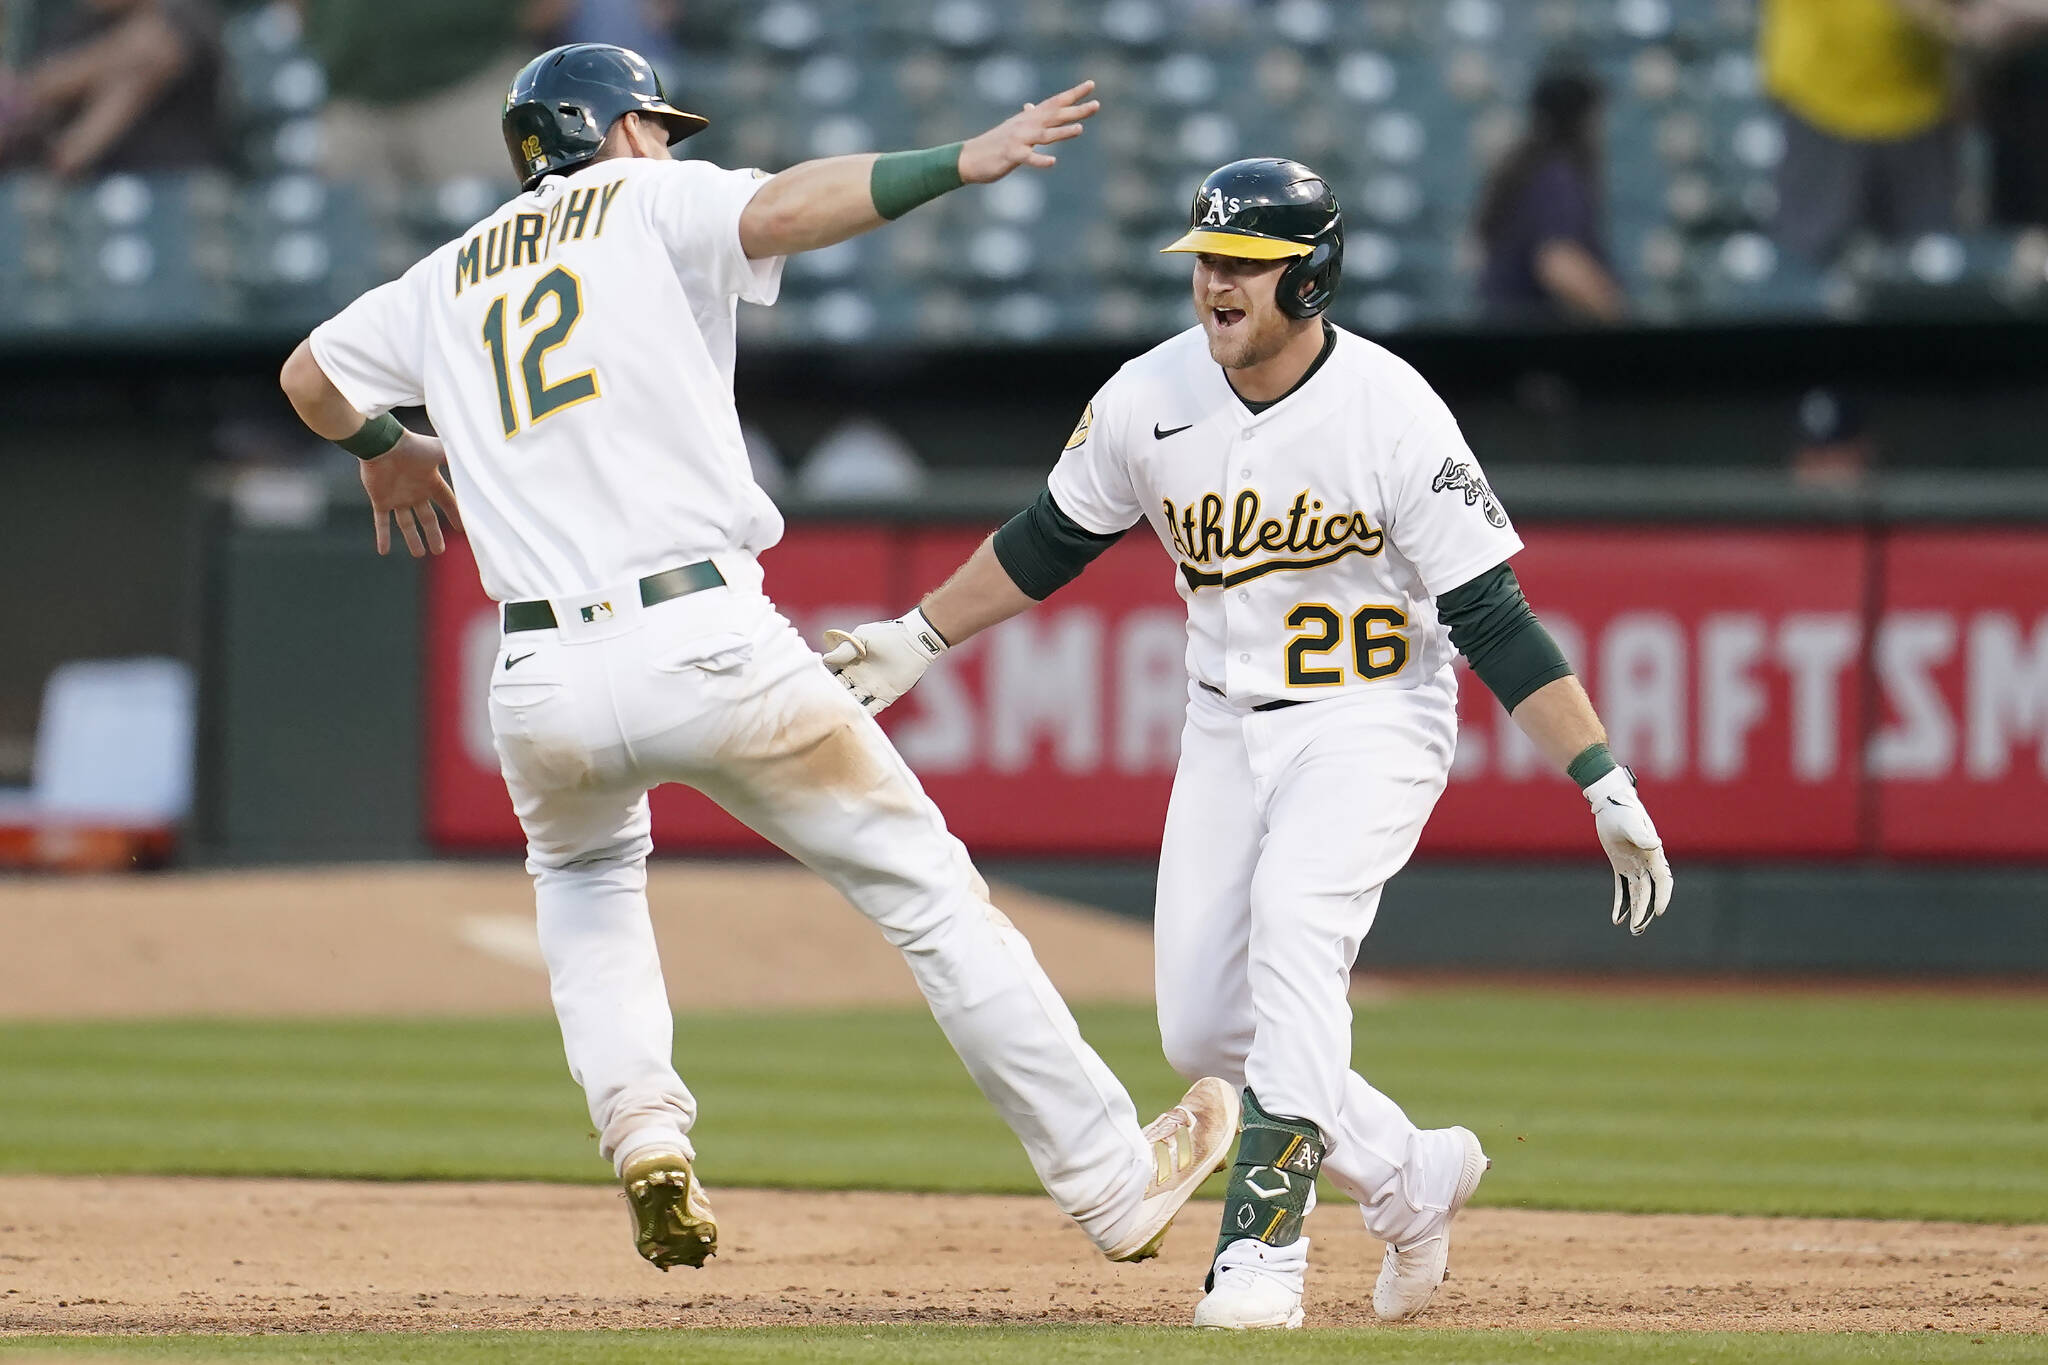 The Athletics’ Sheldon Neuse (26) is congratulated by Sean Murphy after hitting into a fielder’s choice that scored Tony Kemp with the winning run during the 10th inning of a game against the Mariners on Saturday in Oakland, Calif. (AP Photo/Jeff Chiu)